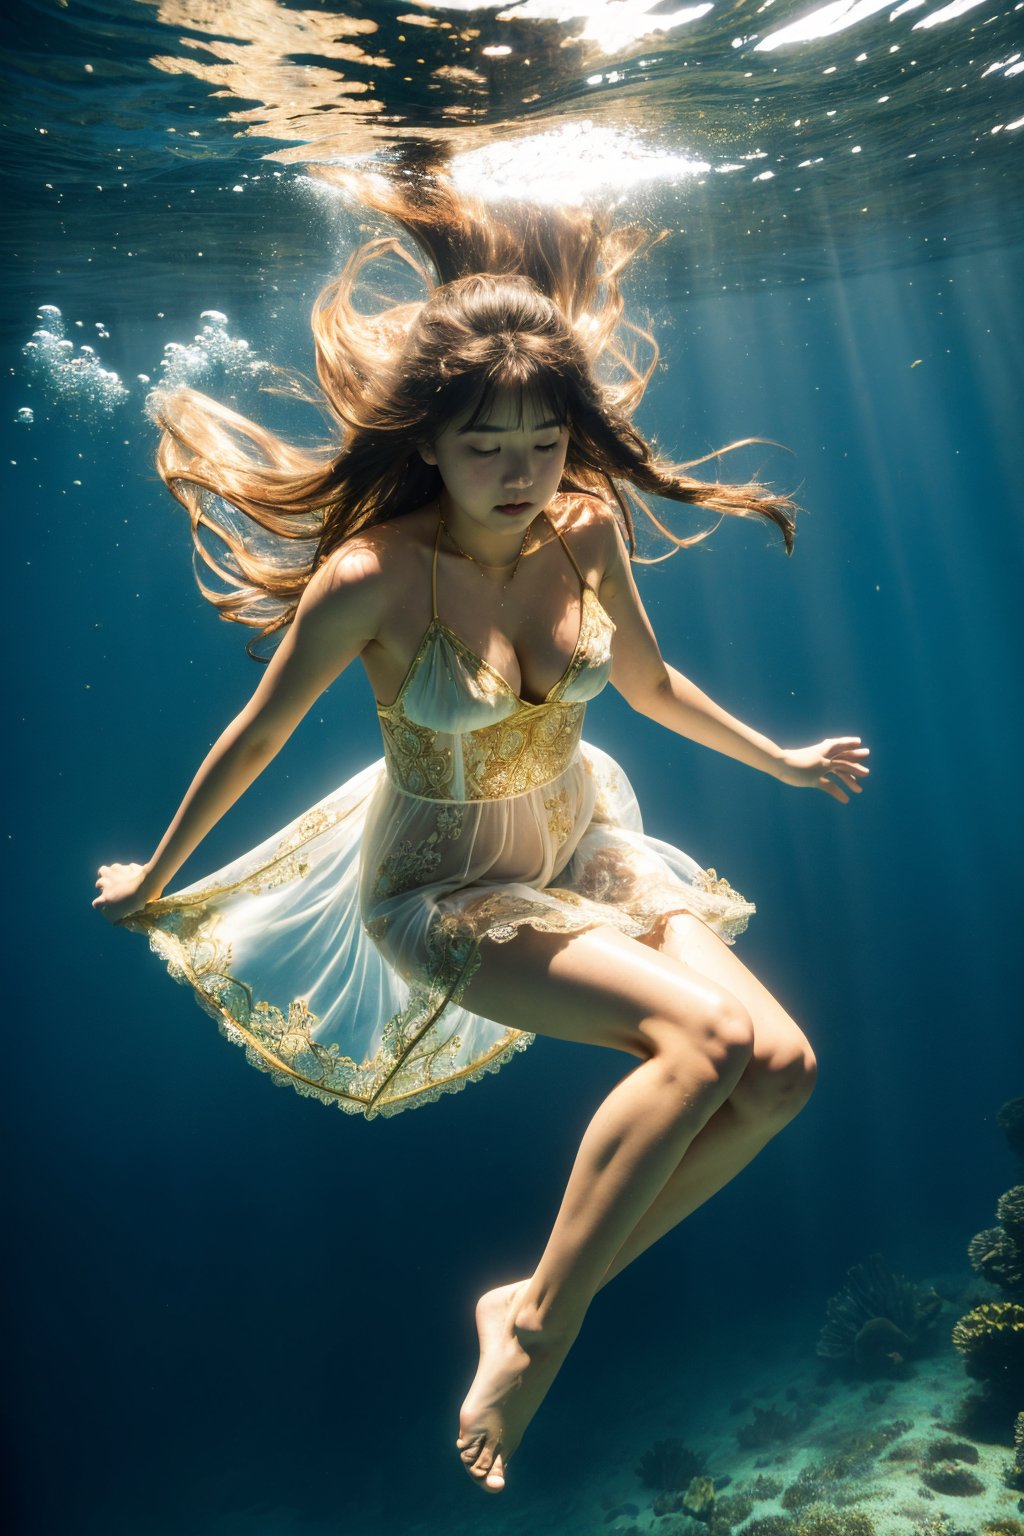 best quality, masterpiece, raw photo of a 1girl diving down underwater which in wet floral lace see-through long white dress which often for ornate details and gold jewelry, floating long brown hair, shy cute face, far side high key light, professional cinematic, hard shadow, soft bokeh, professional photography, balanced contract, balanced exposure,  show cleavage, bare feet, show legs, diving:1.3